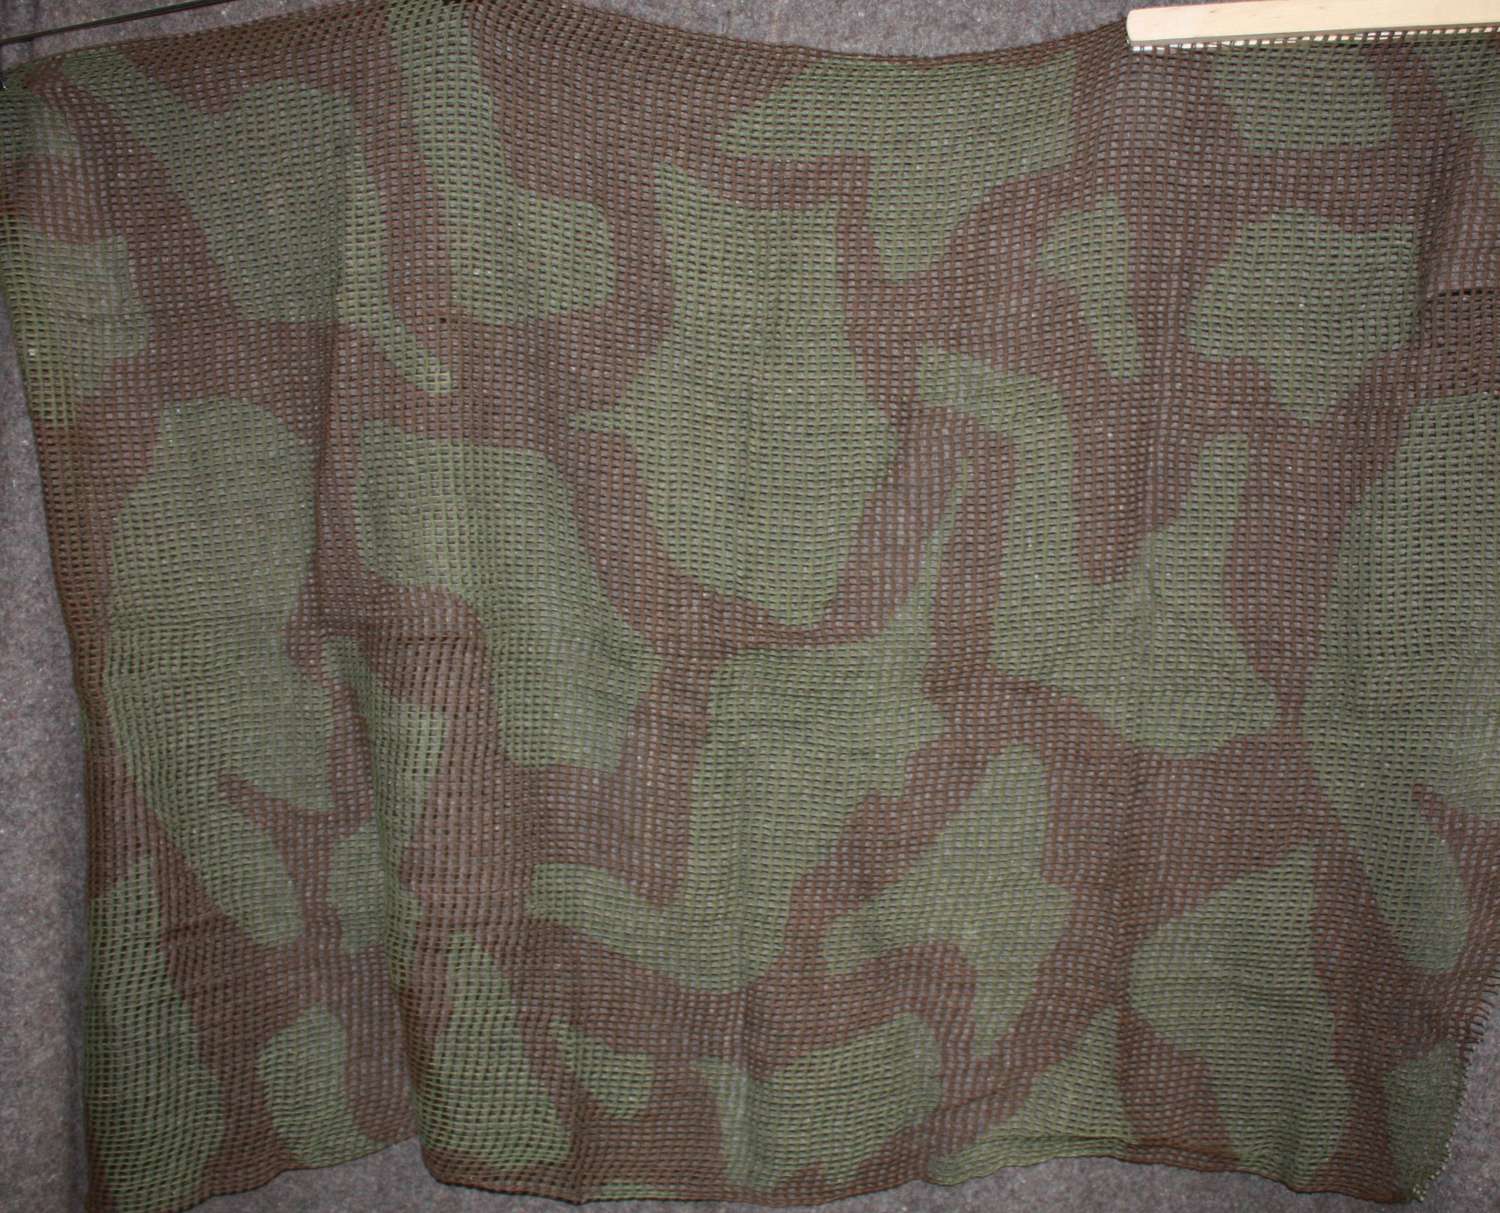 A BRITISH WWII CAMOUFLAGE SCARF IN GOOD USED CONDITION